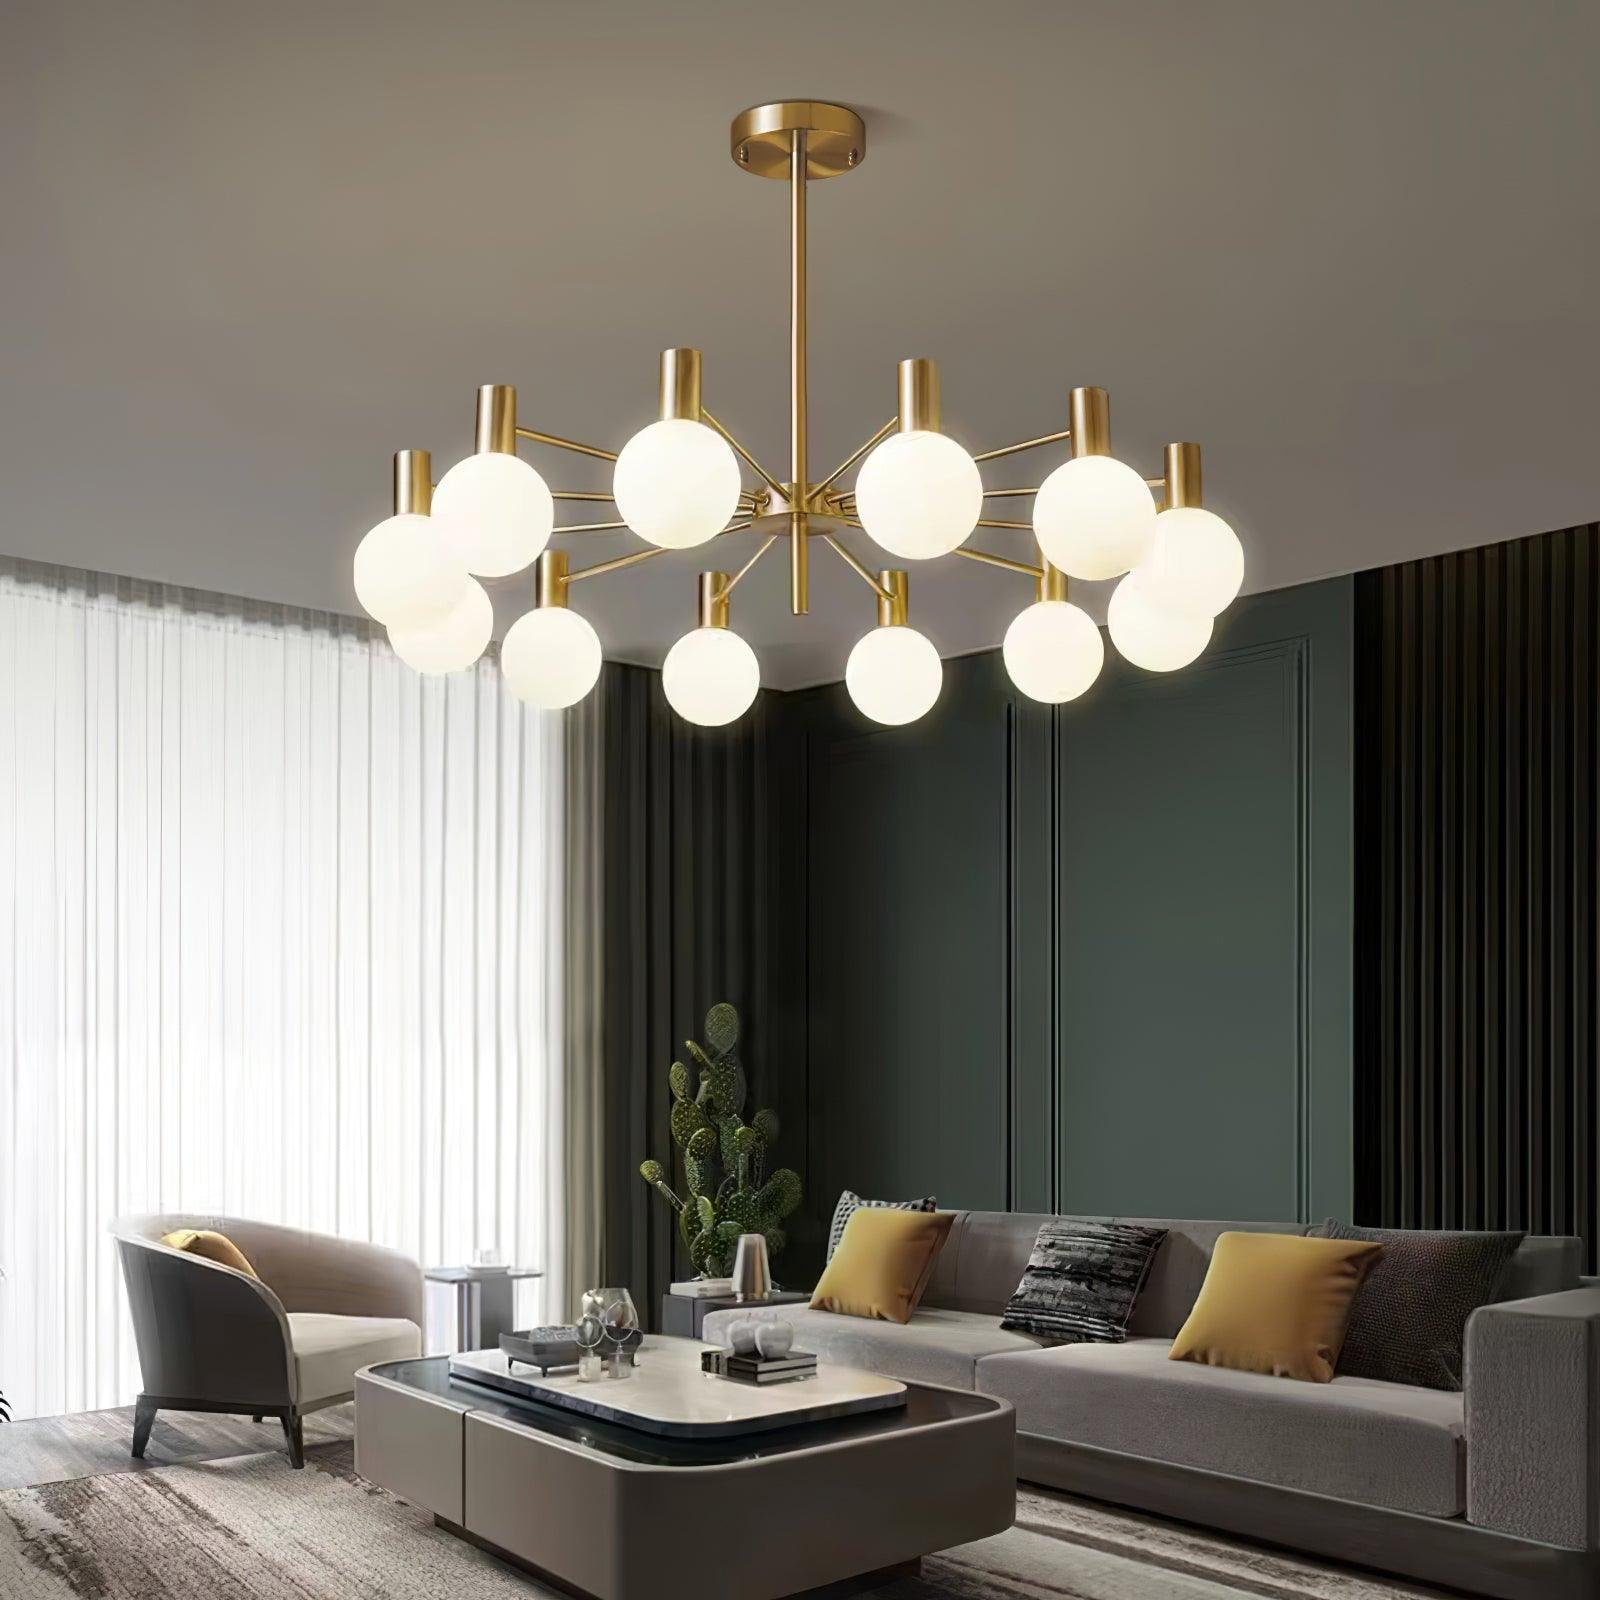 12 Head Selva Chandelier with Copper Plating in White, ∅ 39.4″ x H 7.9″ (100cm x 20cm)